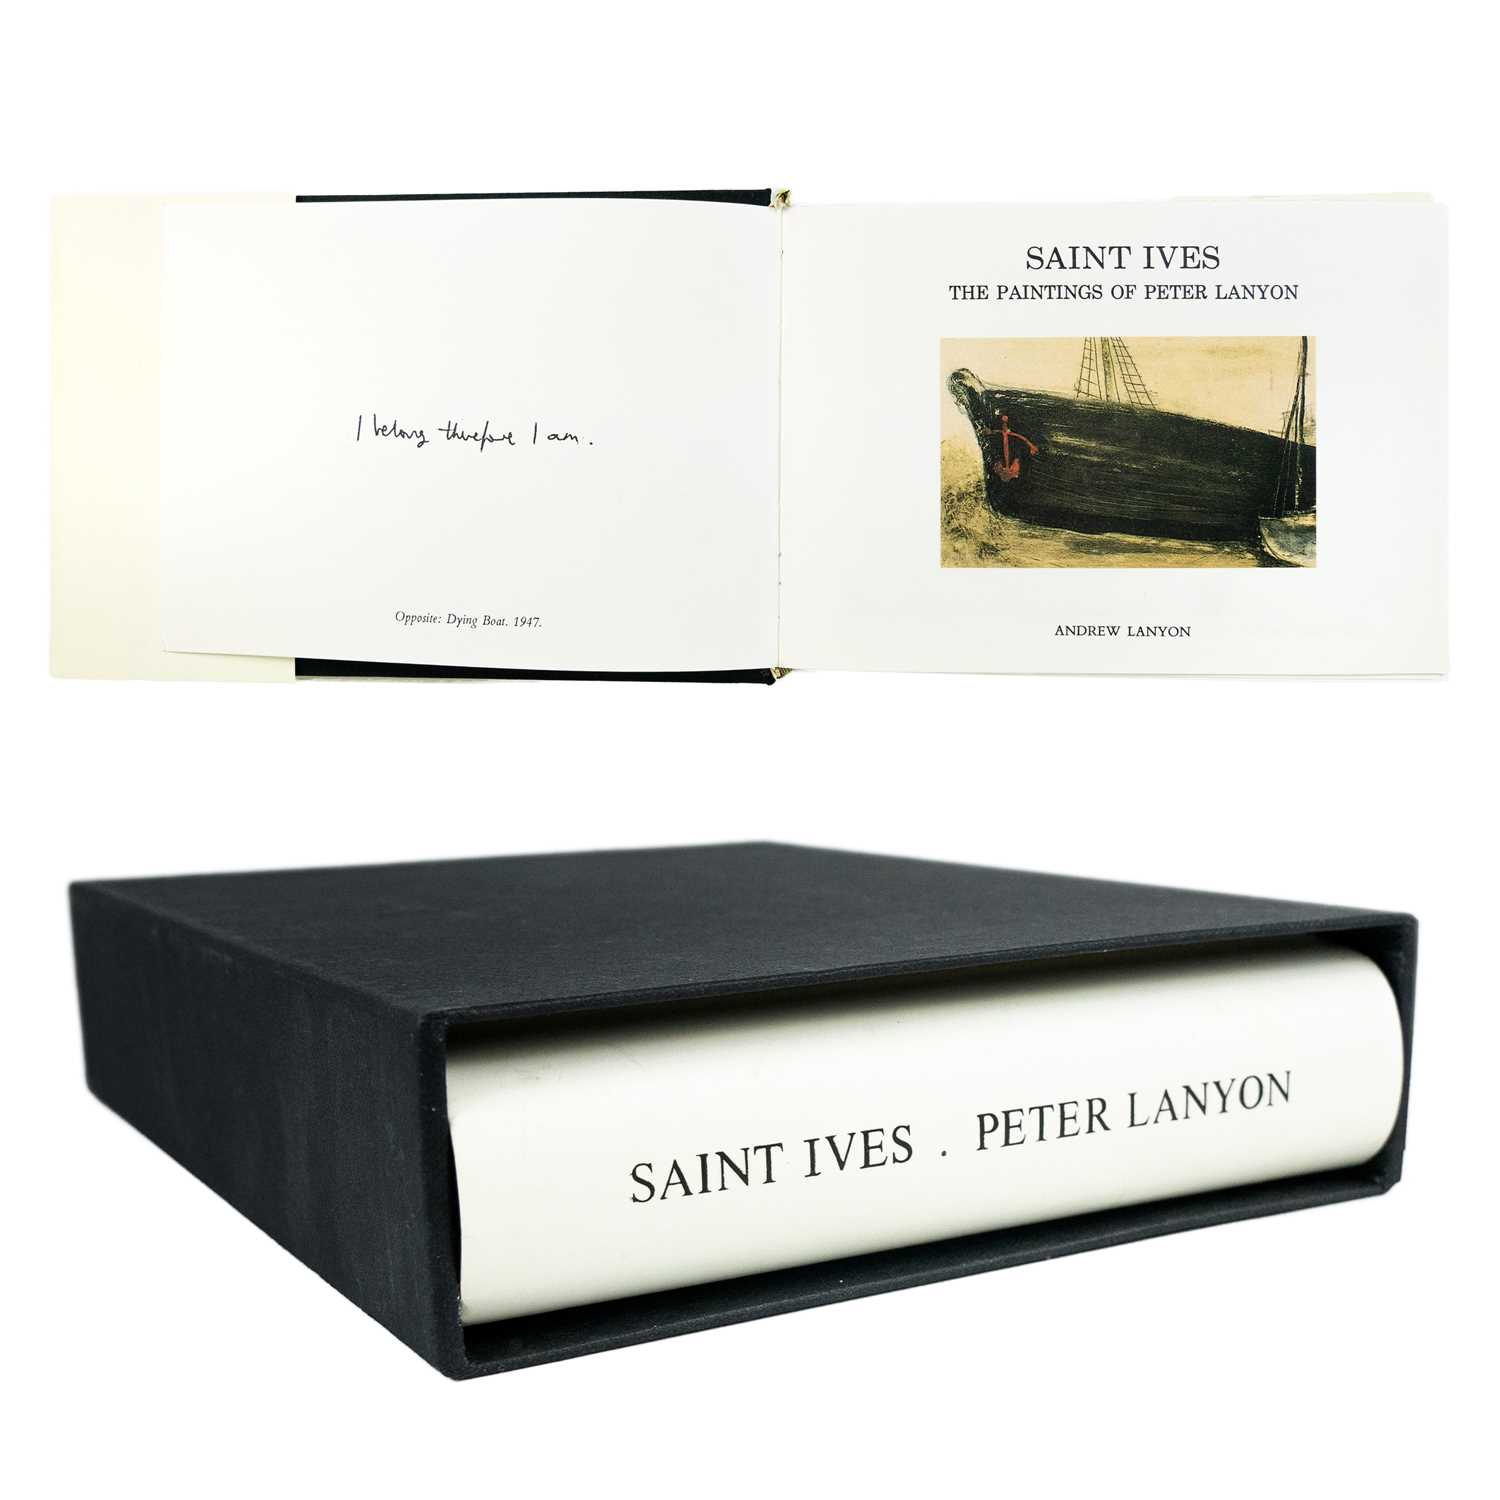 Andrew LANYON (1947) 'Saint Ives: The Paintings of Peter Lanyon', 2001, signed and numbered 57